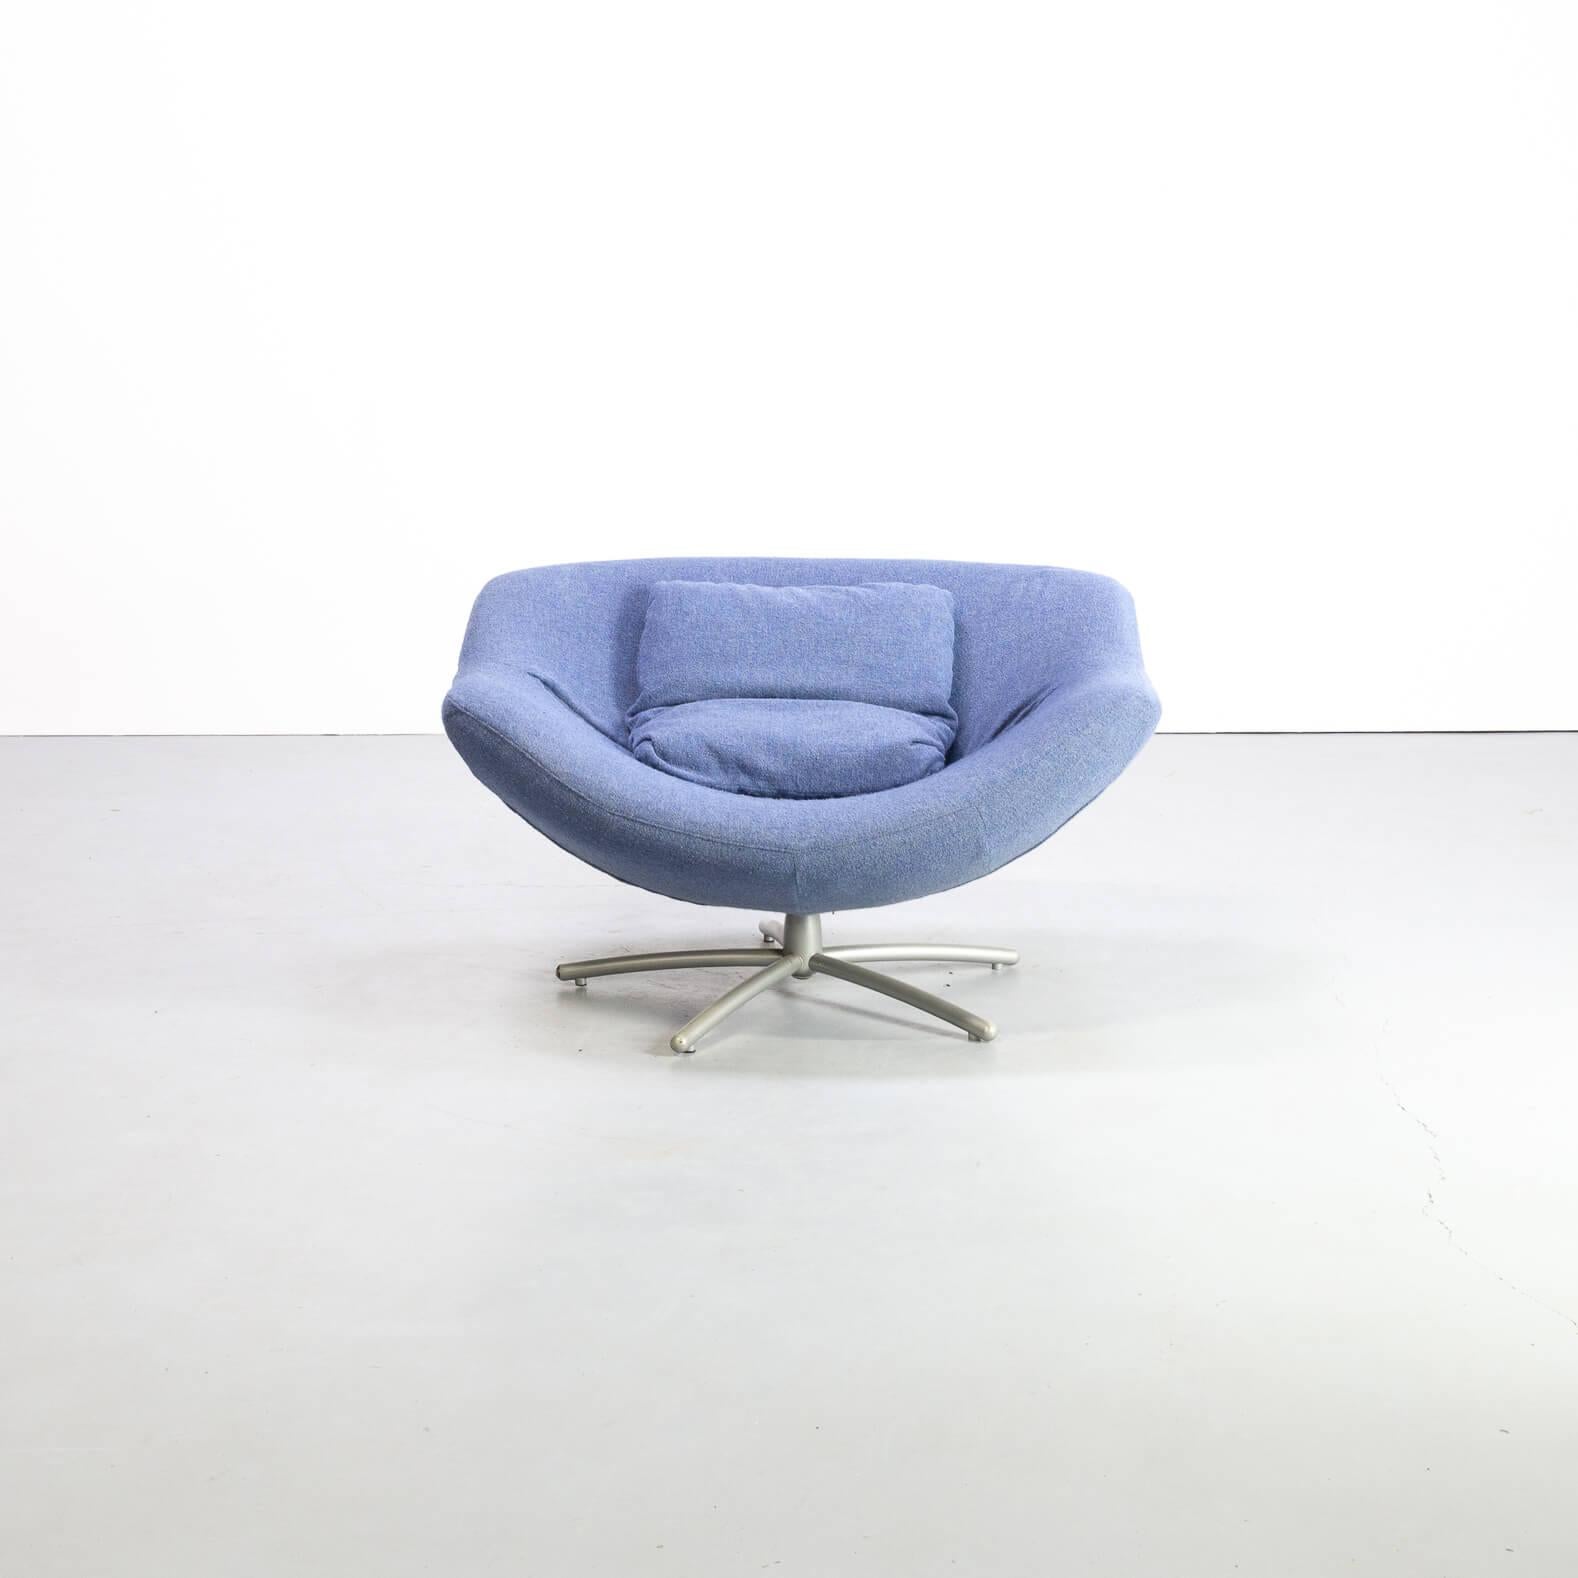 The ‘Gigi’ fauteuil is a fine example of design by Gerard van den Berg. You can feel the lining of the chair almost just by looking at the chair. This uniquely shaped shell comes with a lot of possible sitting possibilities. A lounge chair to live